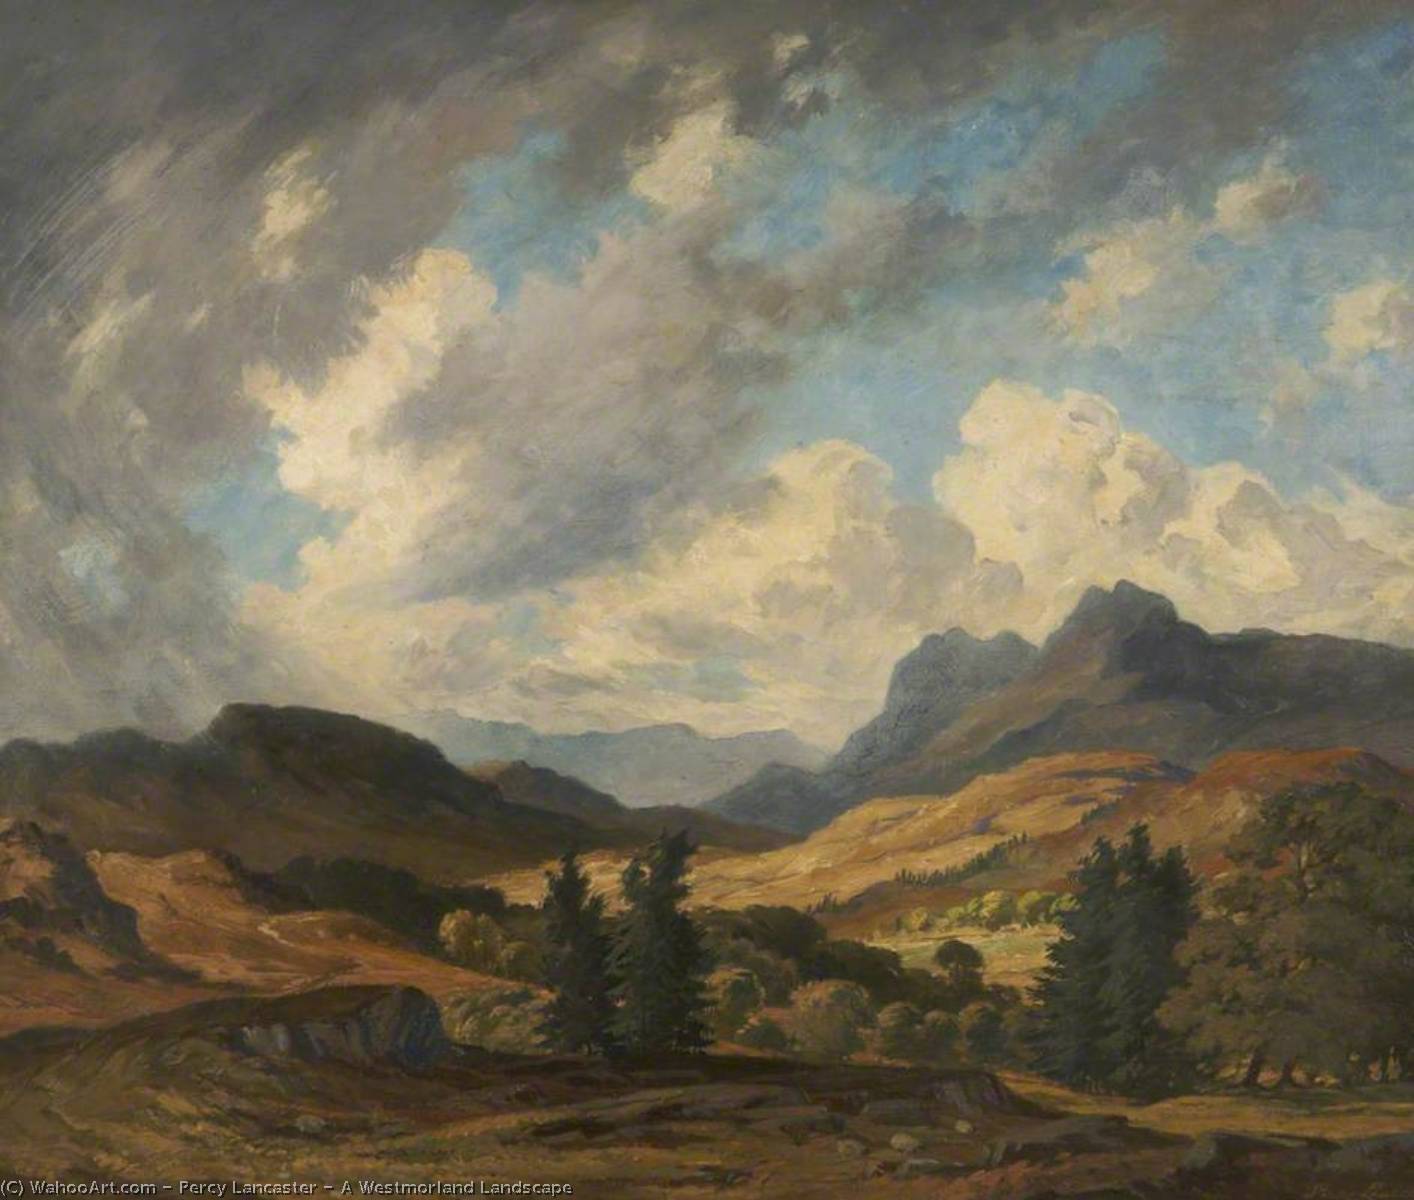 Order Art Reproductions A Westmorland Landscape, 1946 by Percy Lancaster (1878-1951) | ArtsDot.com